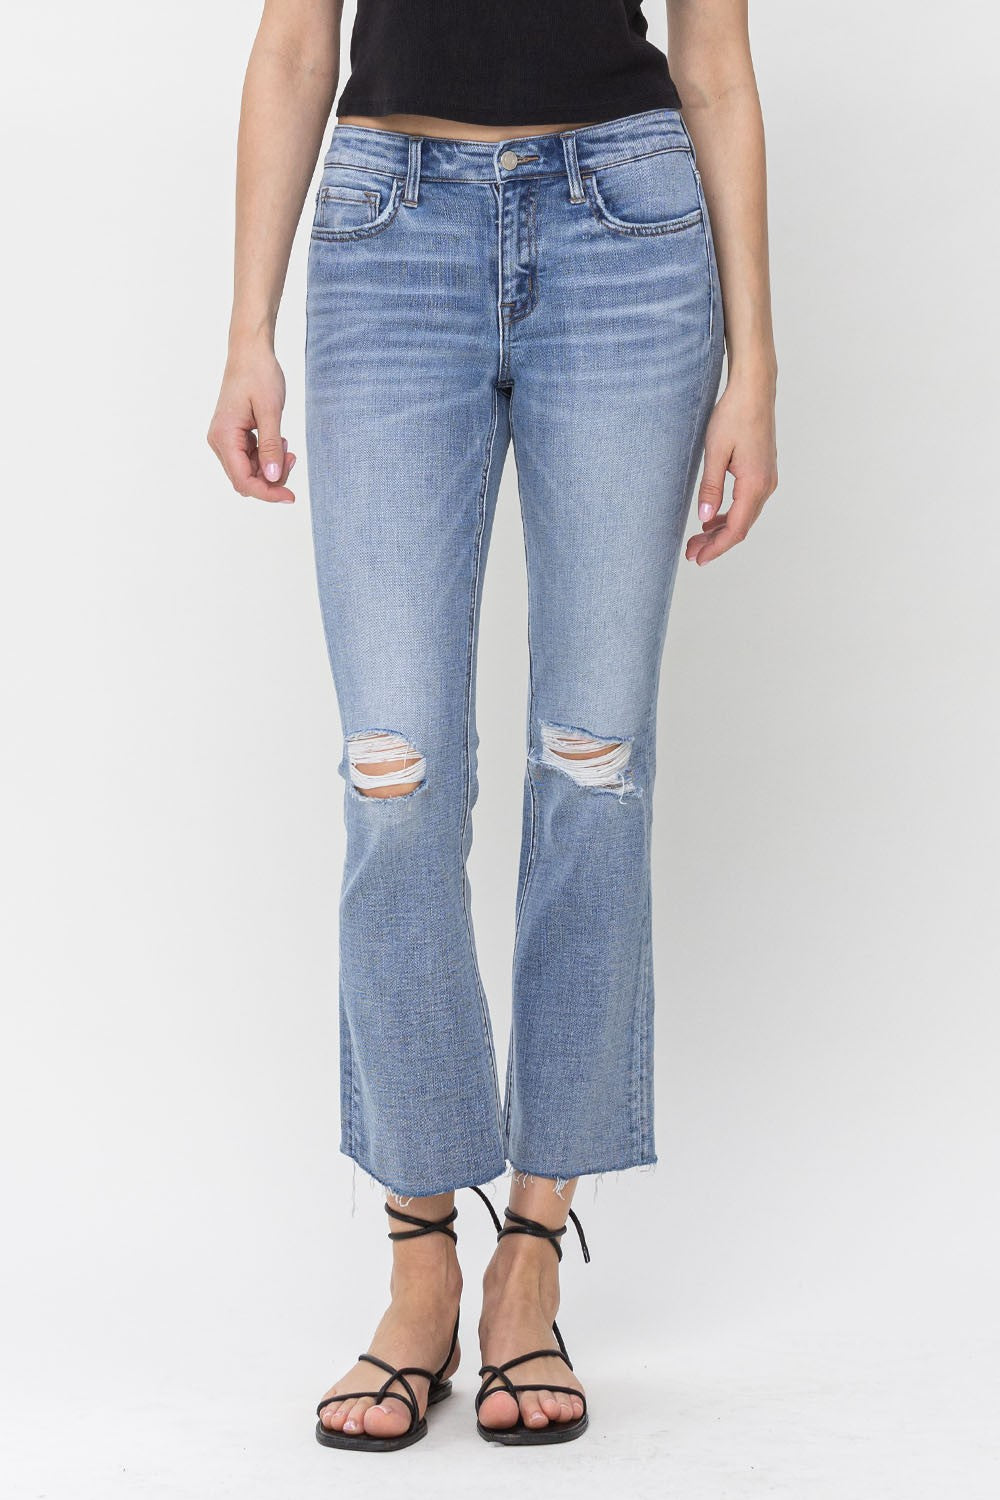 Mid Rise Mini Flare with Raw Hem Jeans from Vervet by Flying